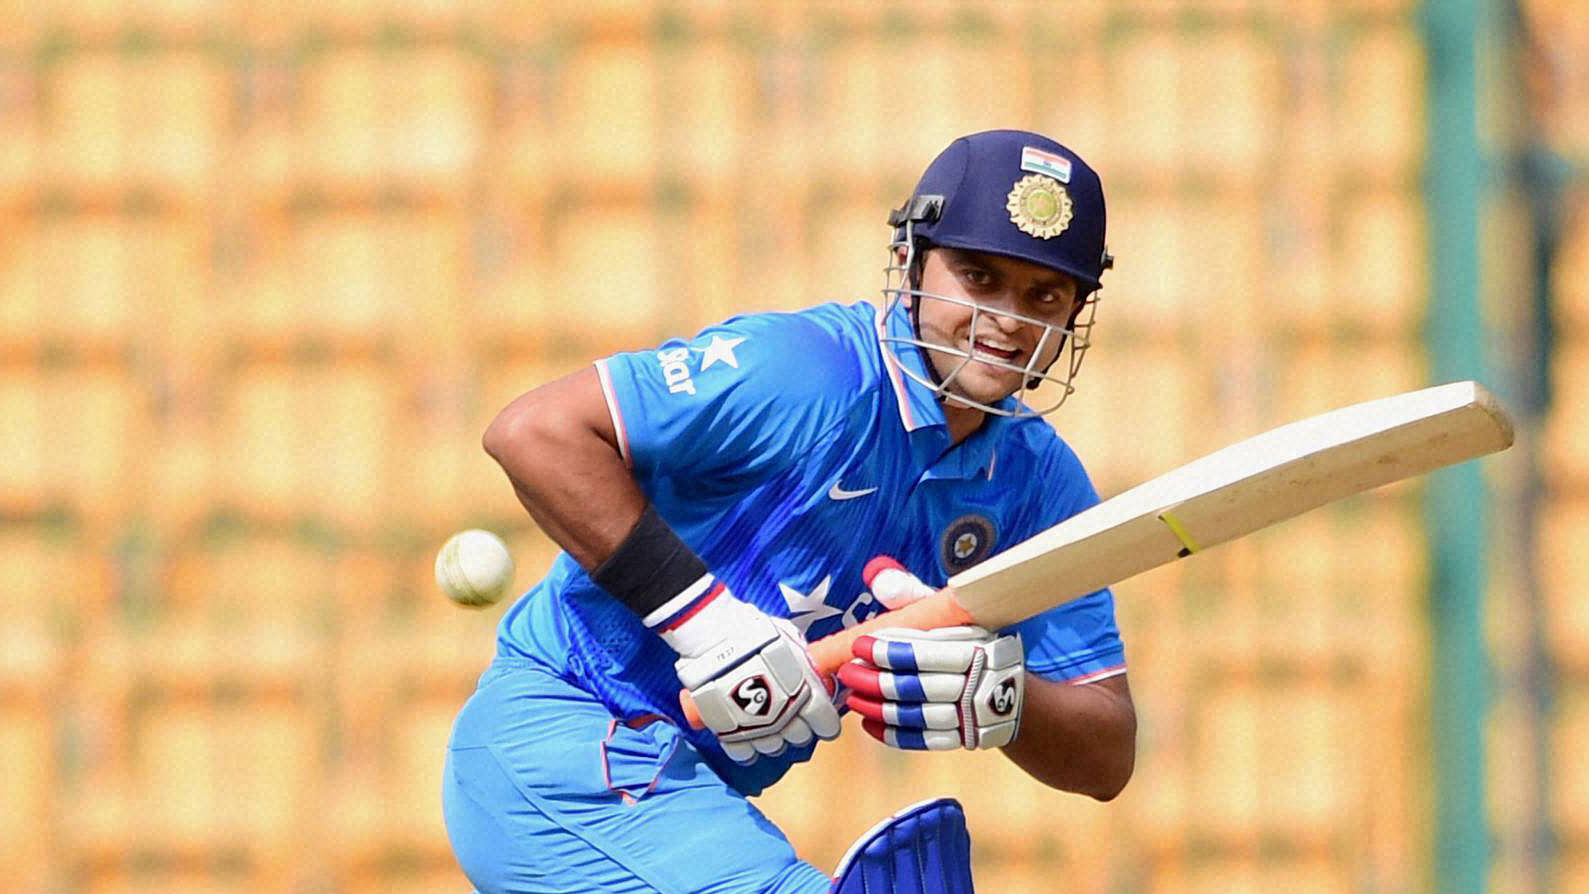 Suresh Raina has became the first Indian cricketer to score 8,000 runs in T20 cricket.